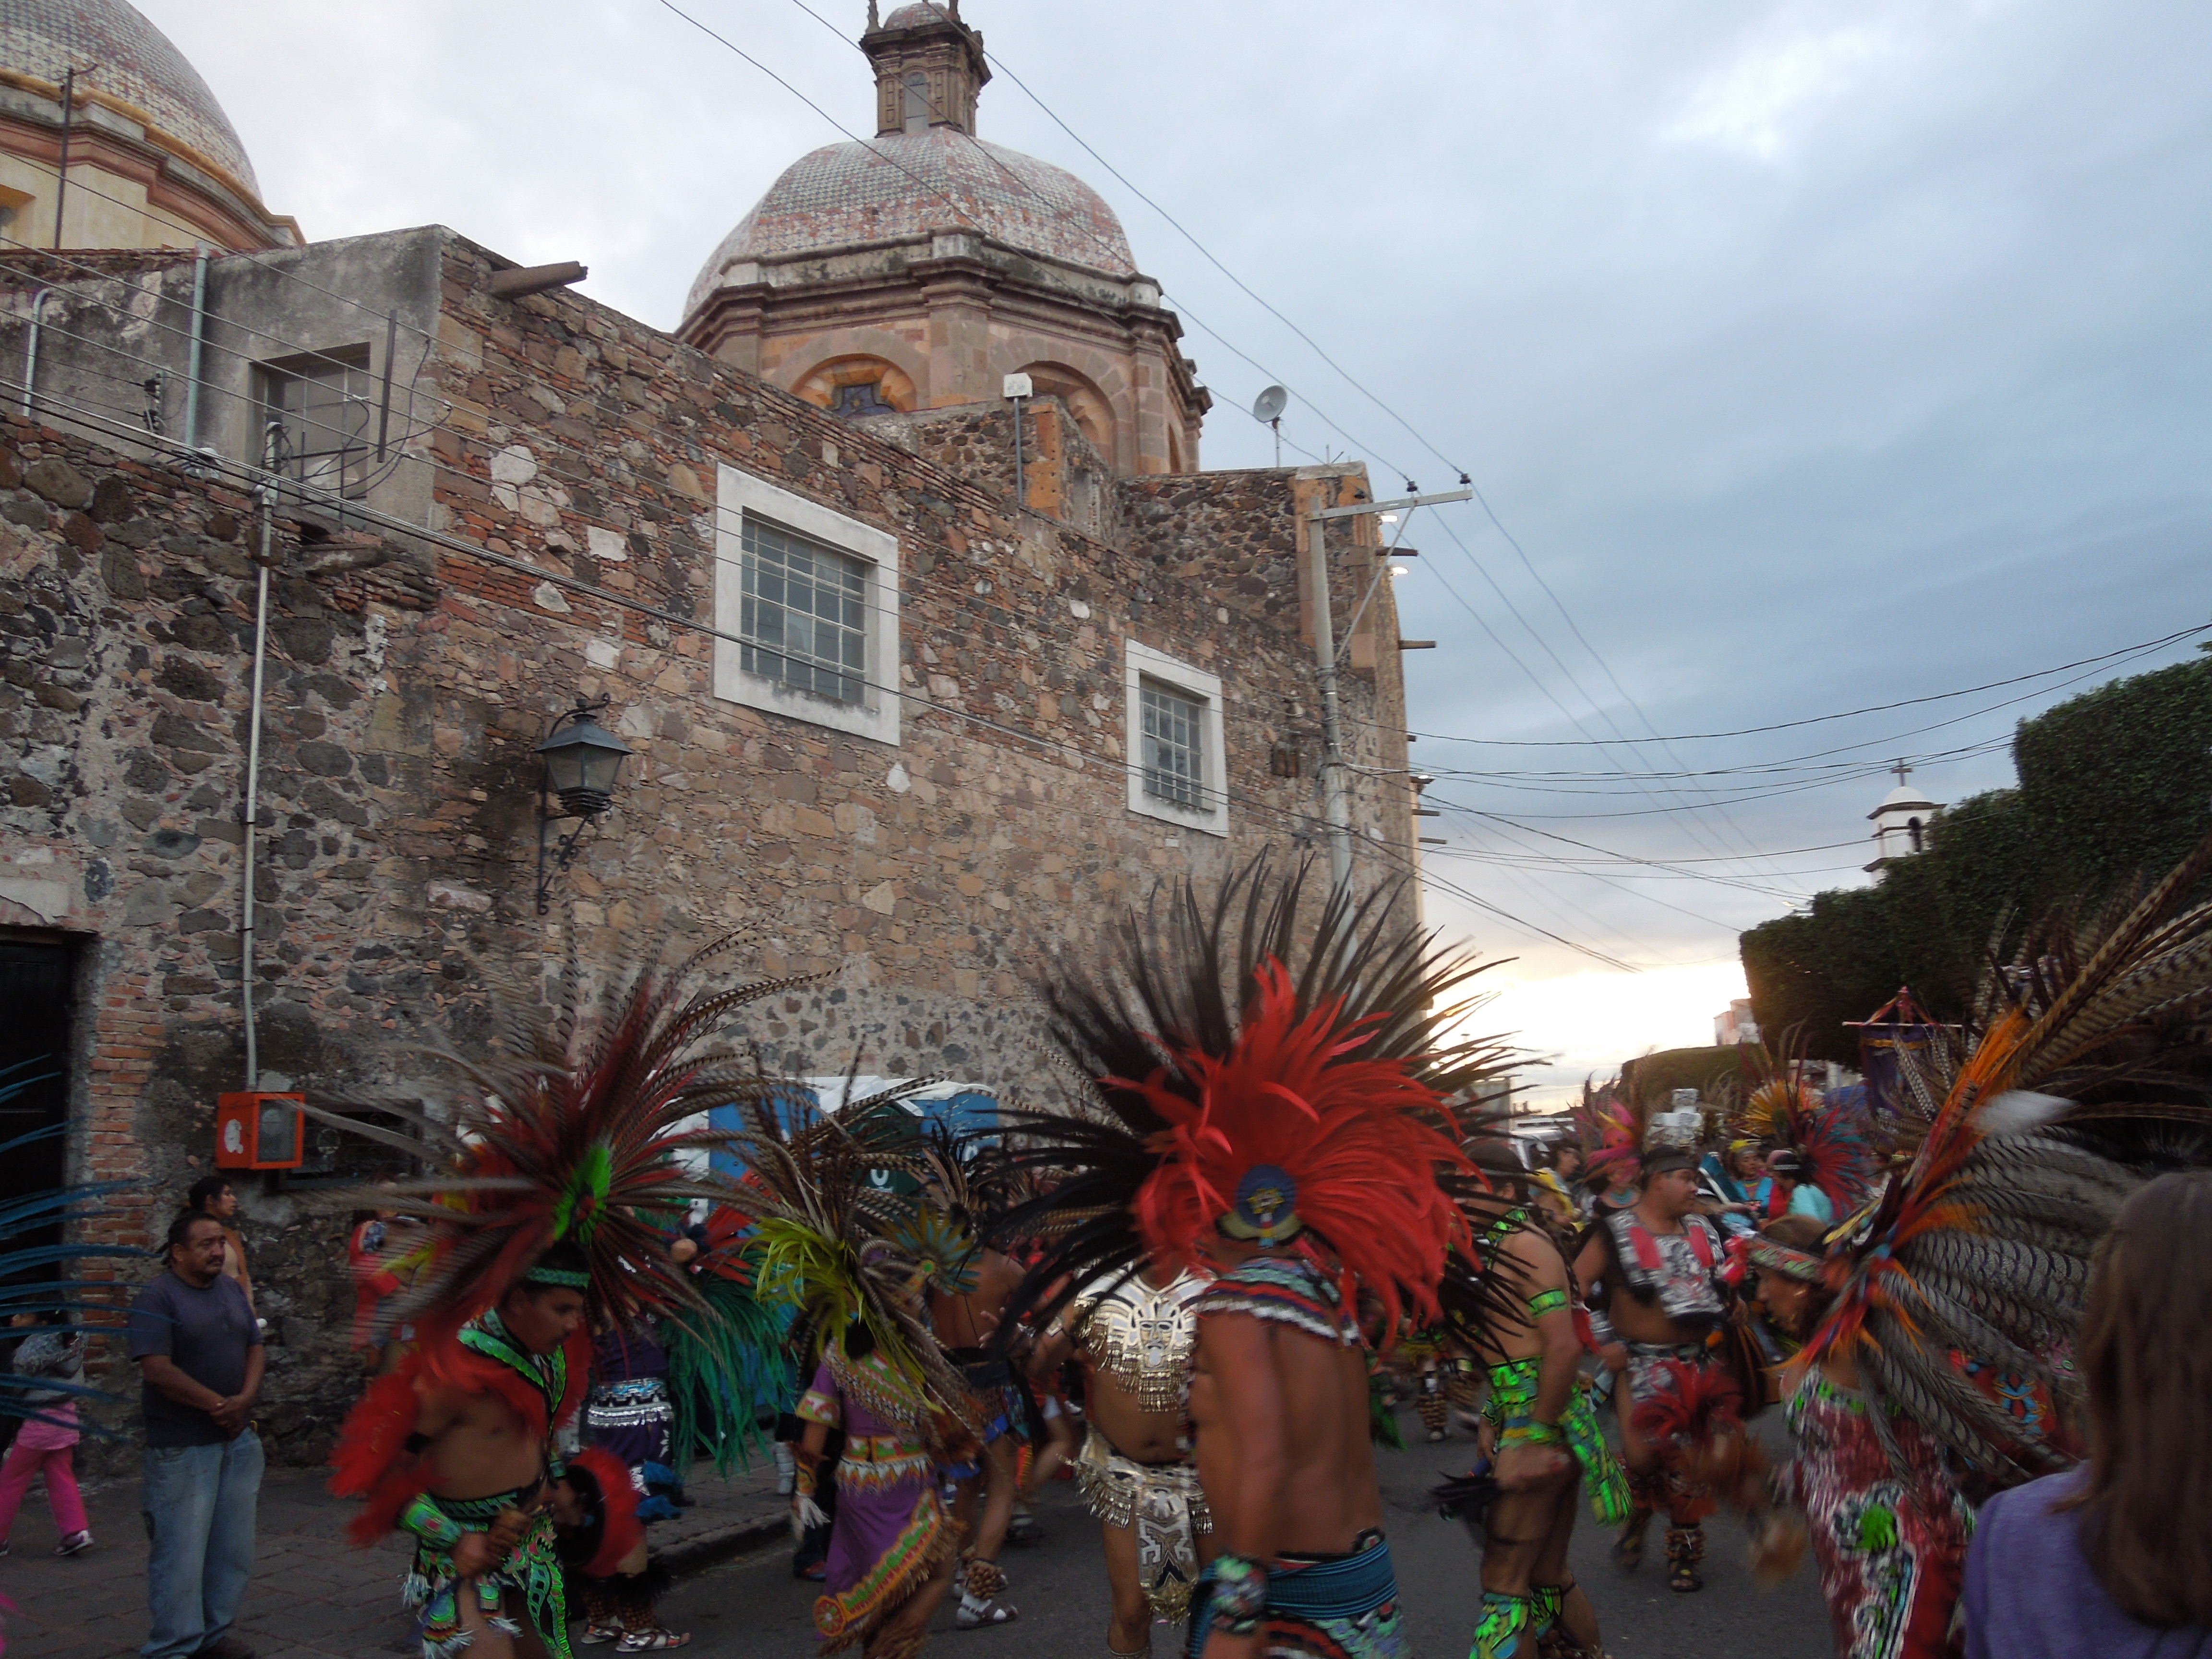 Energetic drummers and dancers in Aztec-style clothing wear headdresses with long feathers radiating outward in all directions. They gather near the old, stone walls of the temple of Santa Cruz. A tower with a dome can be seen on top of the temple. 